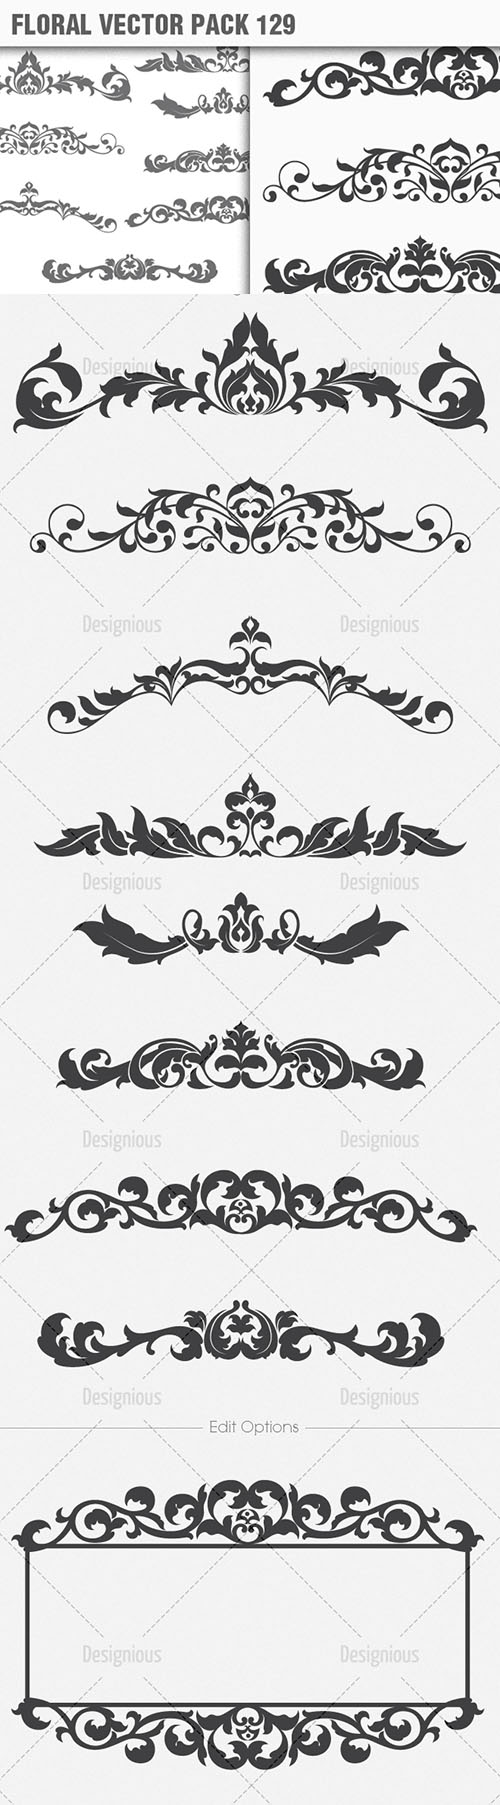 Floral Vector Pack 129